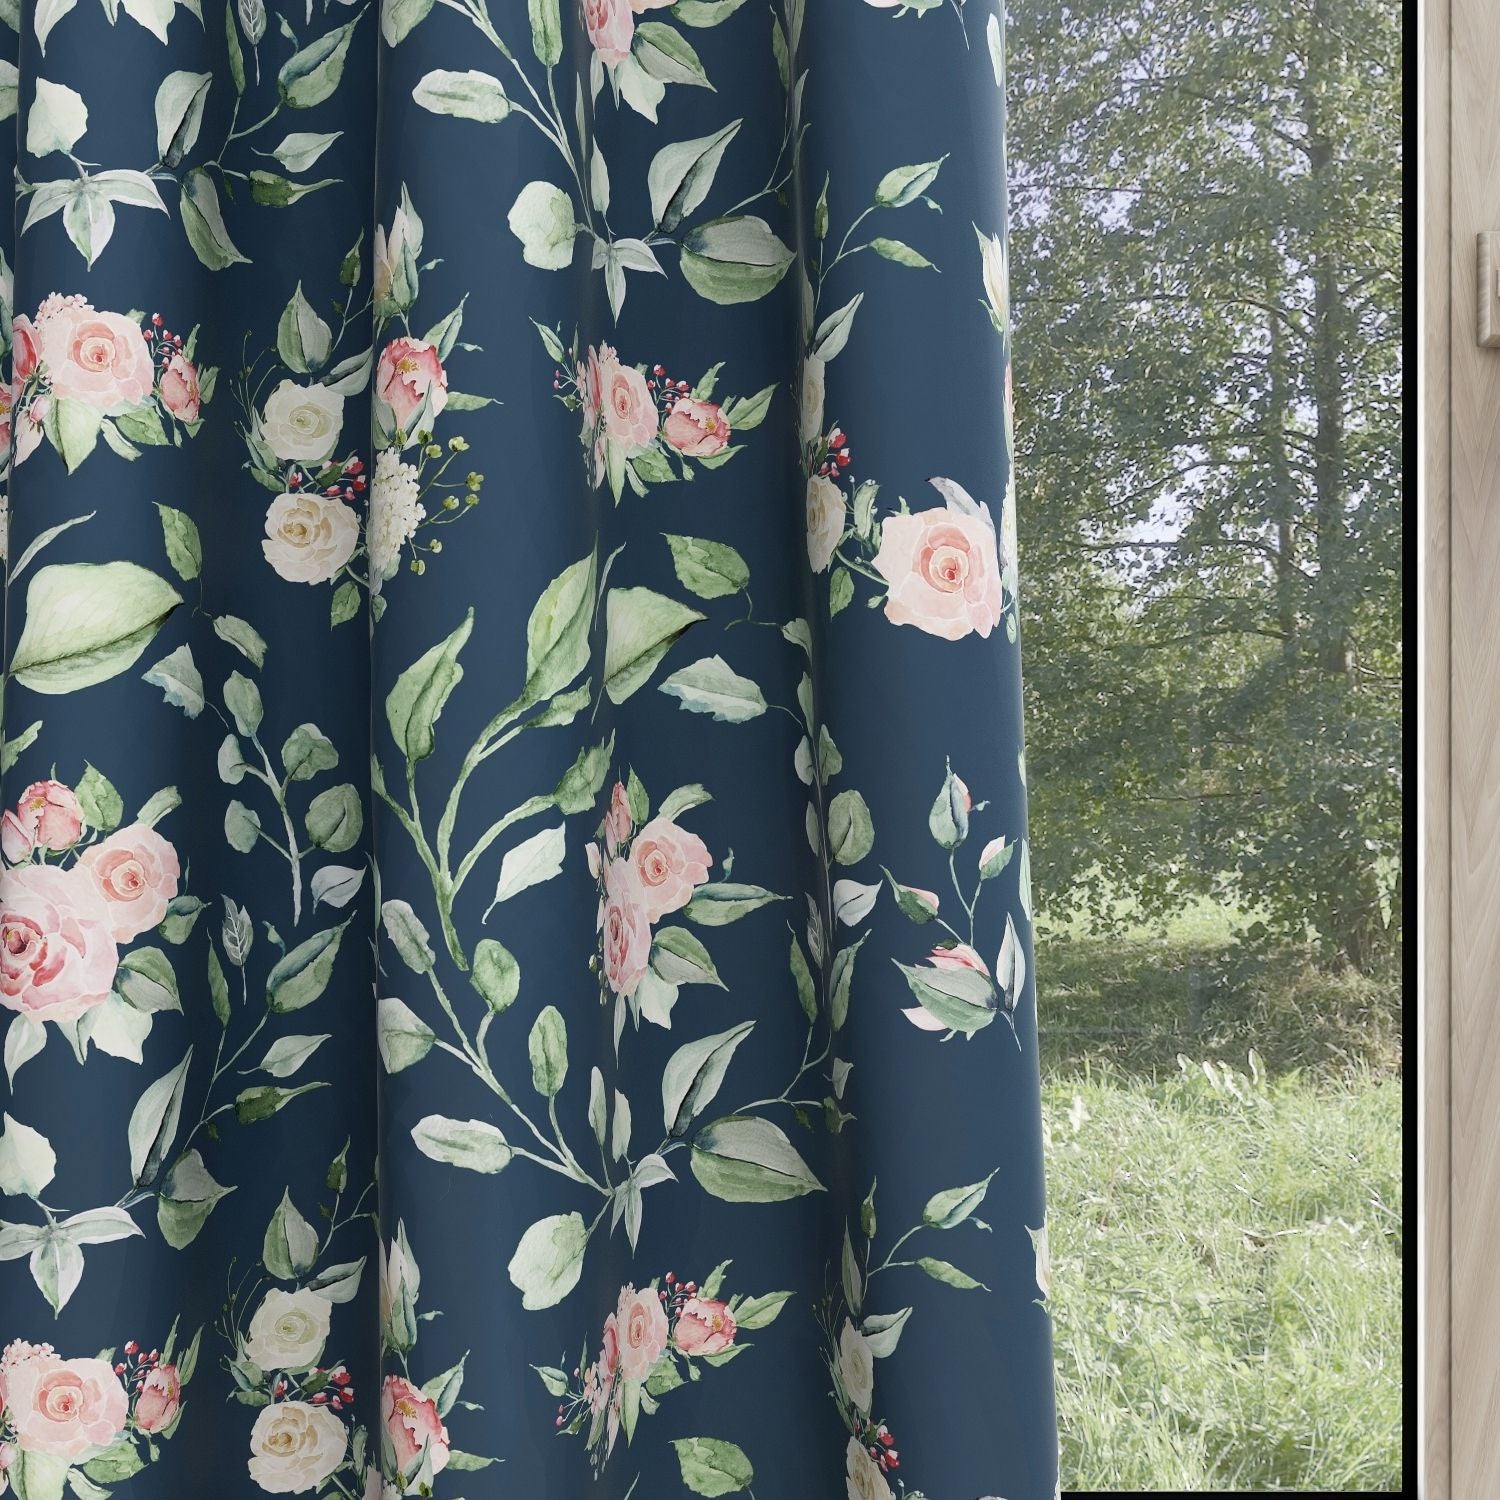 Floral Kids & Nursery Blackout Curtains - Midnight Roses